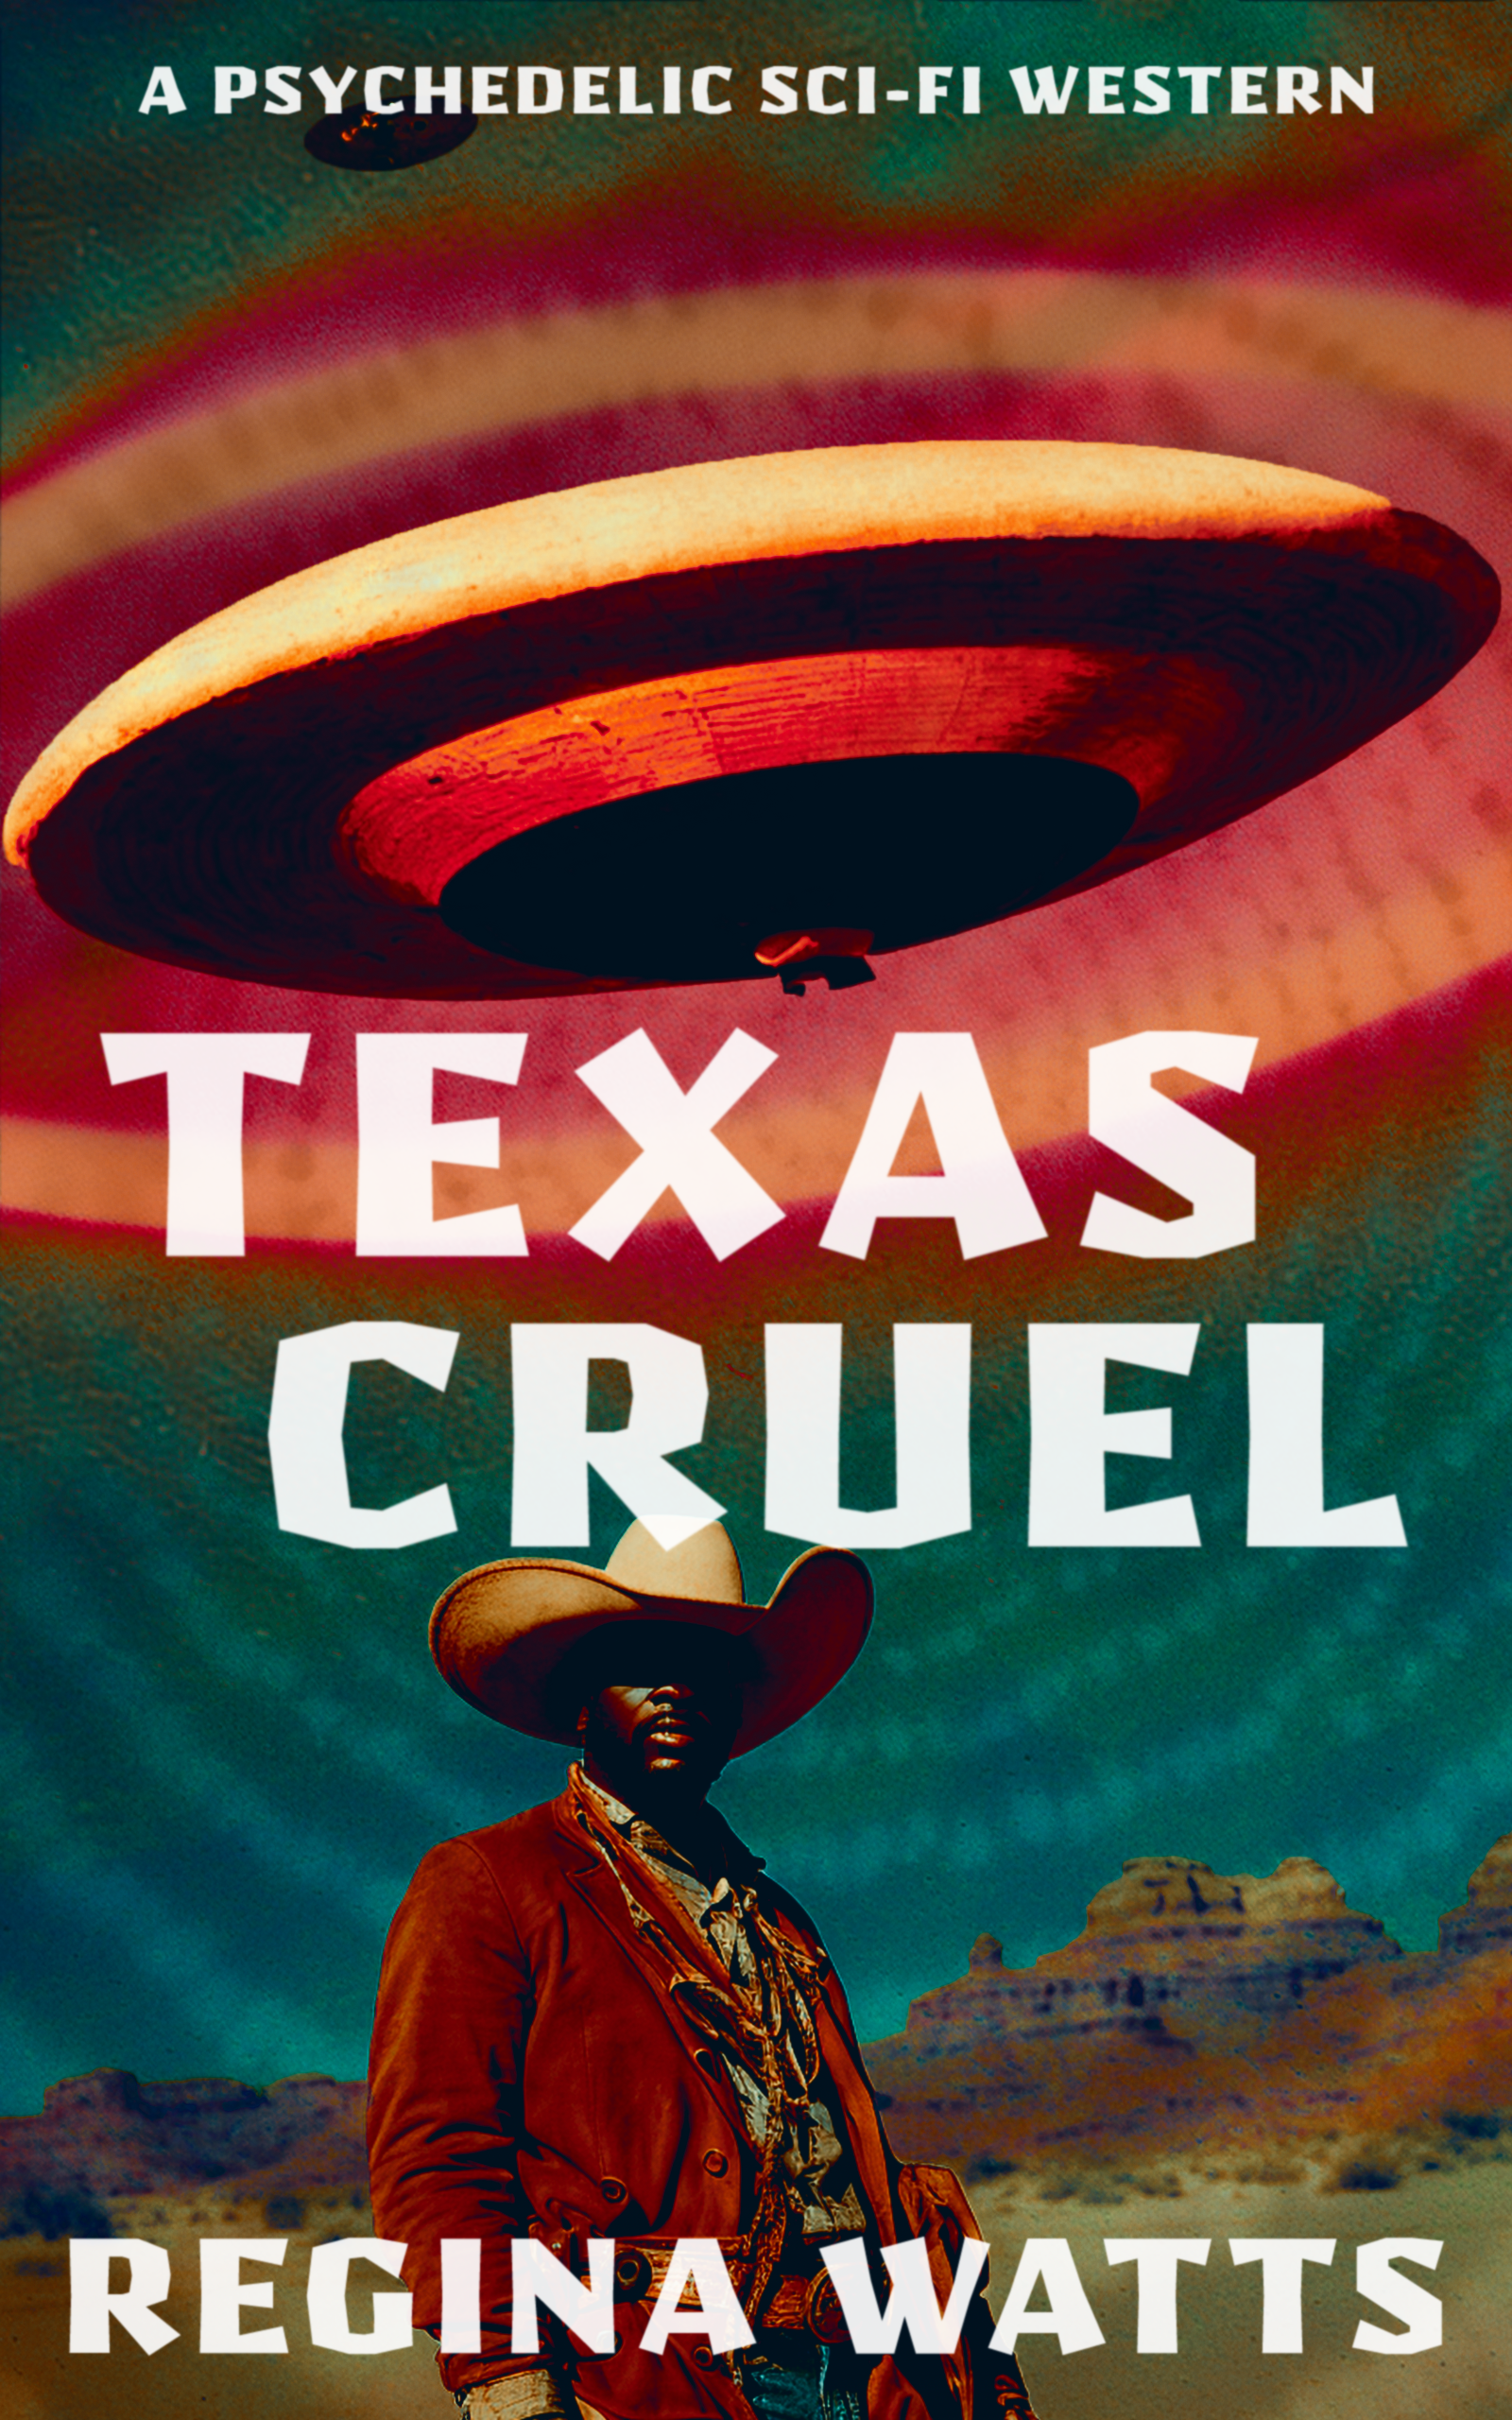 Cover for 'Texas Cruel', a Black cowboy with a UFO overhead